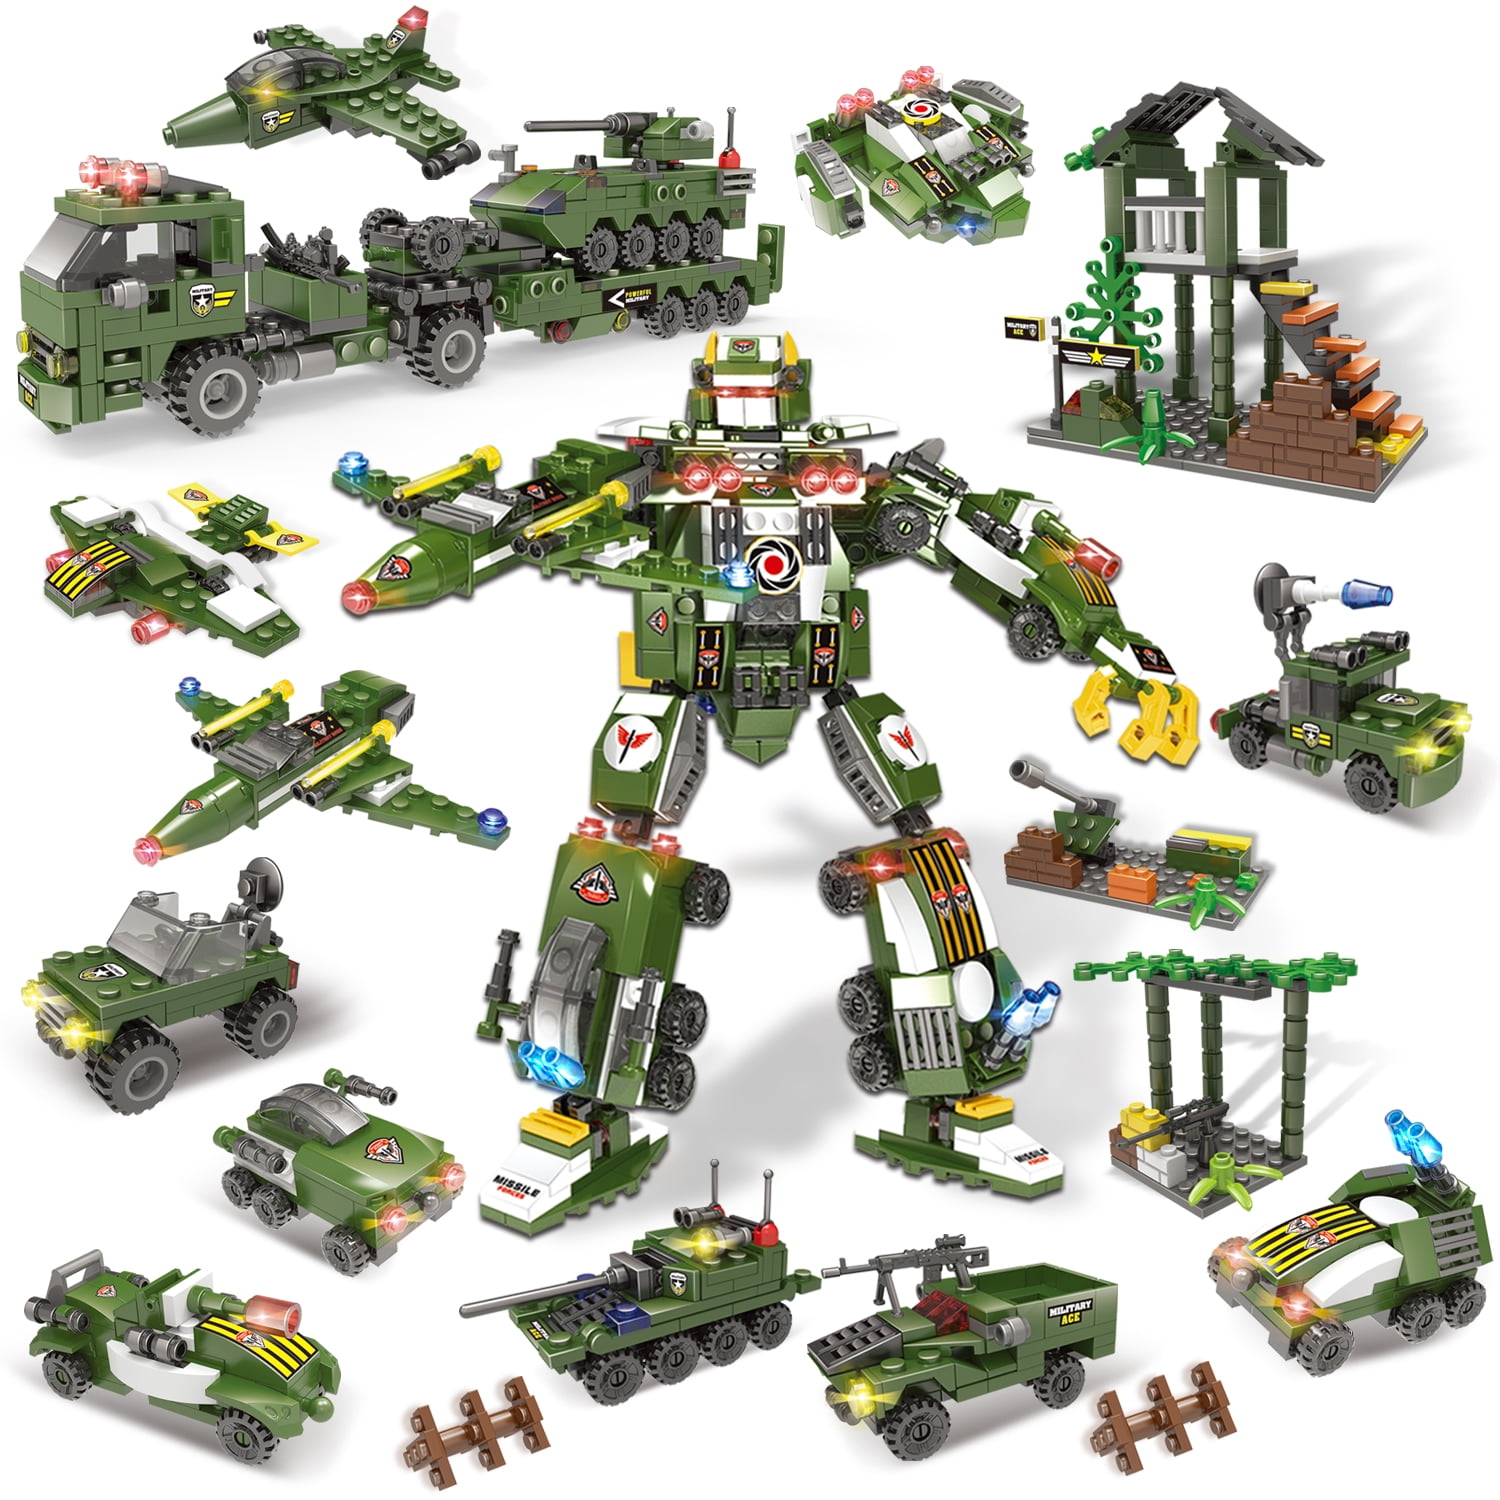 JUMEI STEM Robot Building Toys 12-in-1Building Blocks Toys for 6 Year Dld Boys,Construction Vehicles Kit Building Blocks Best Gifts for Kids Aged 8 9 10 11 Yr Old 376 PCS Engineering Building Bricks